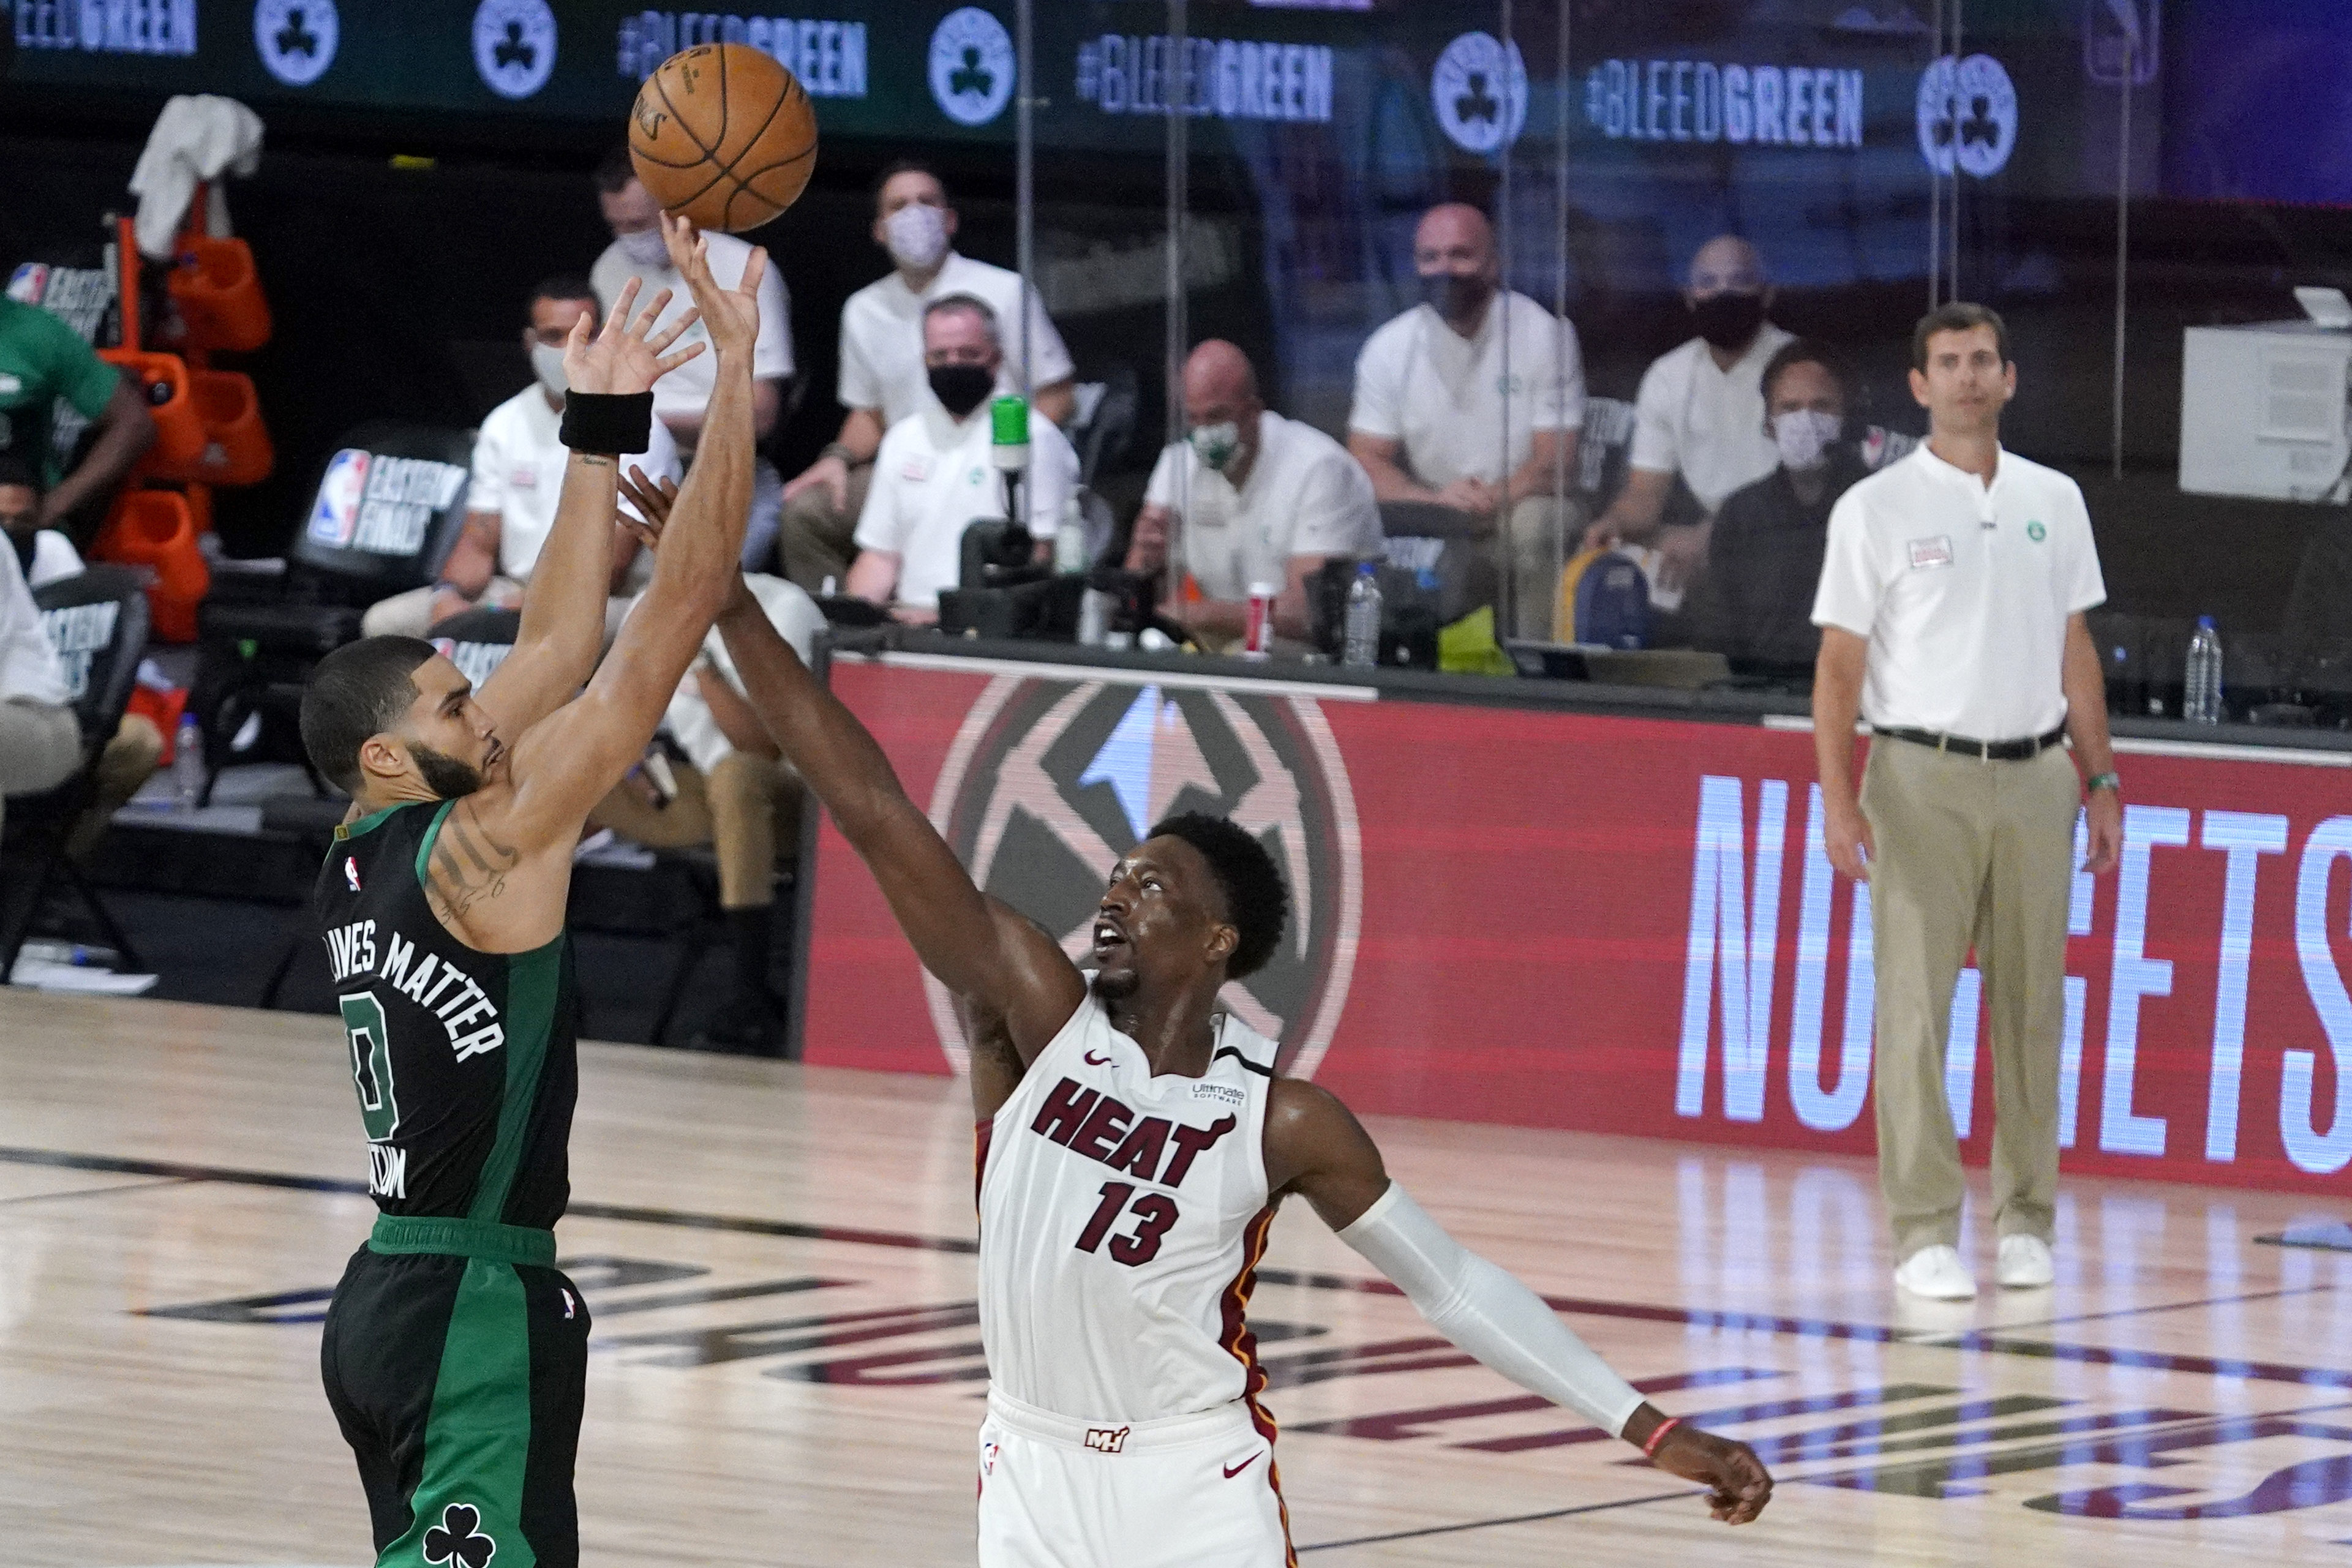 It was the stuff of legends, but Celtics know they let one get away in loss  to Heat in Game 1 - The Boston Globe